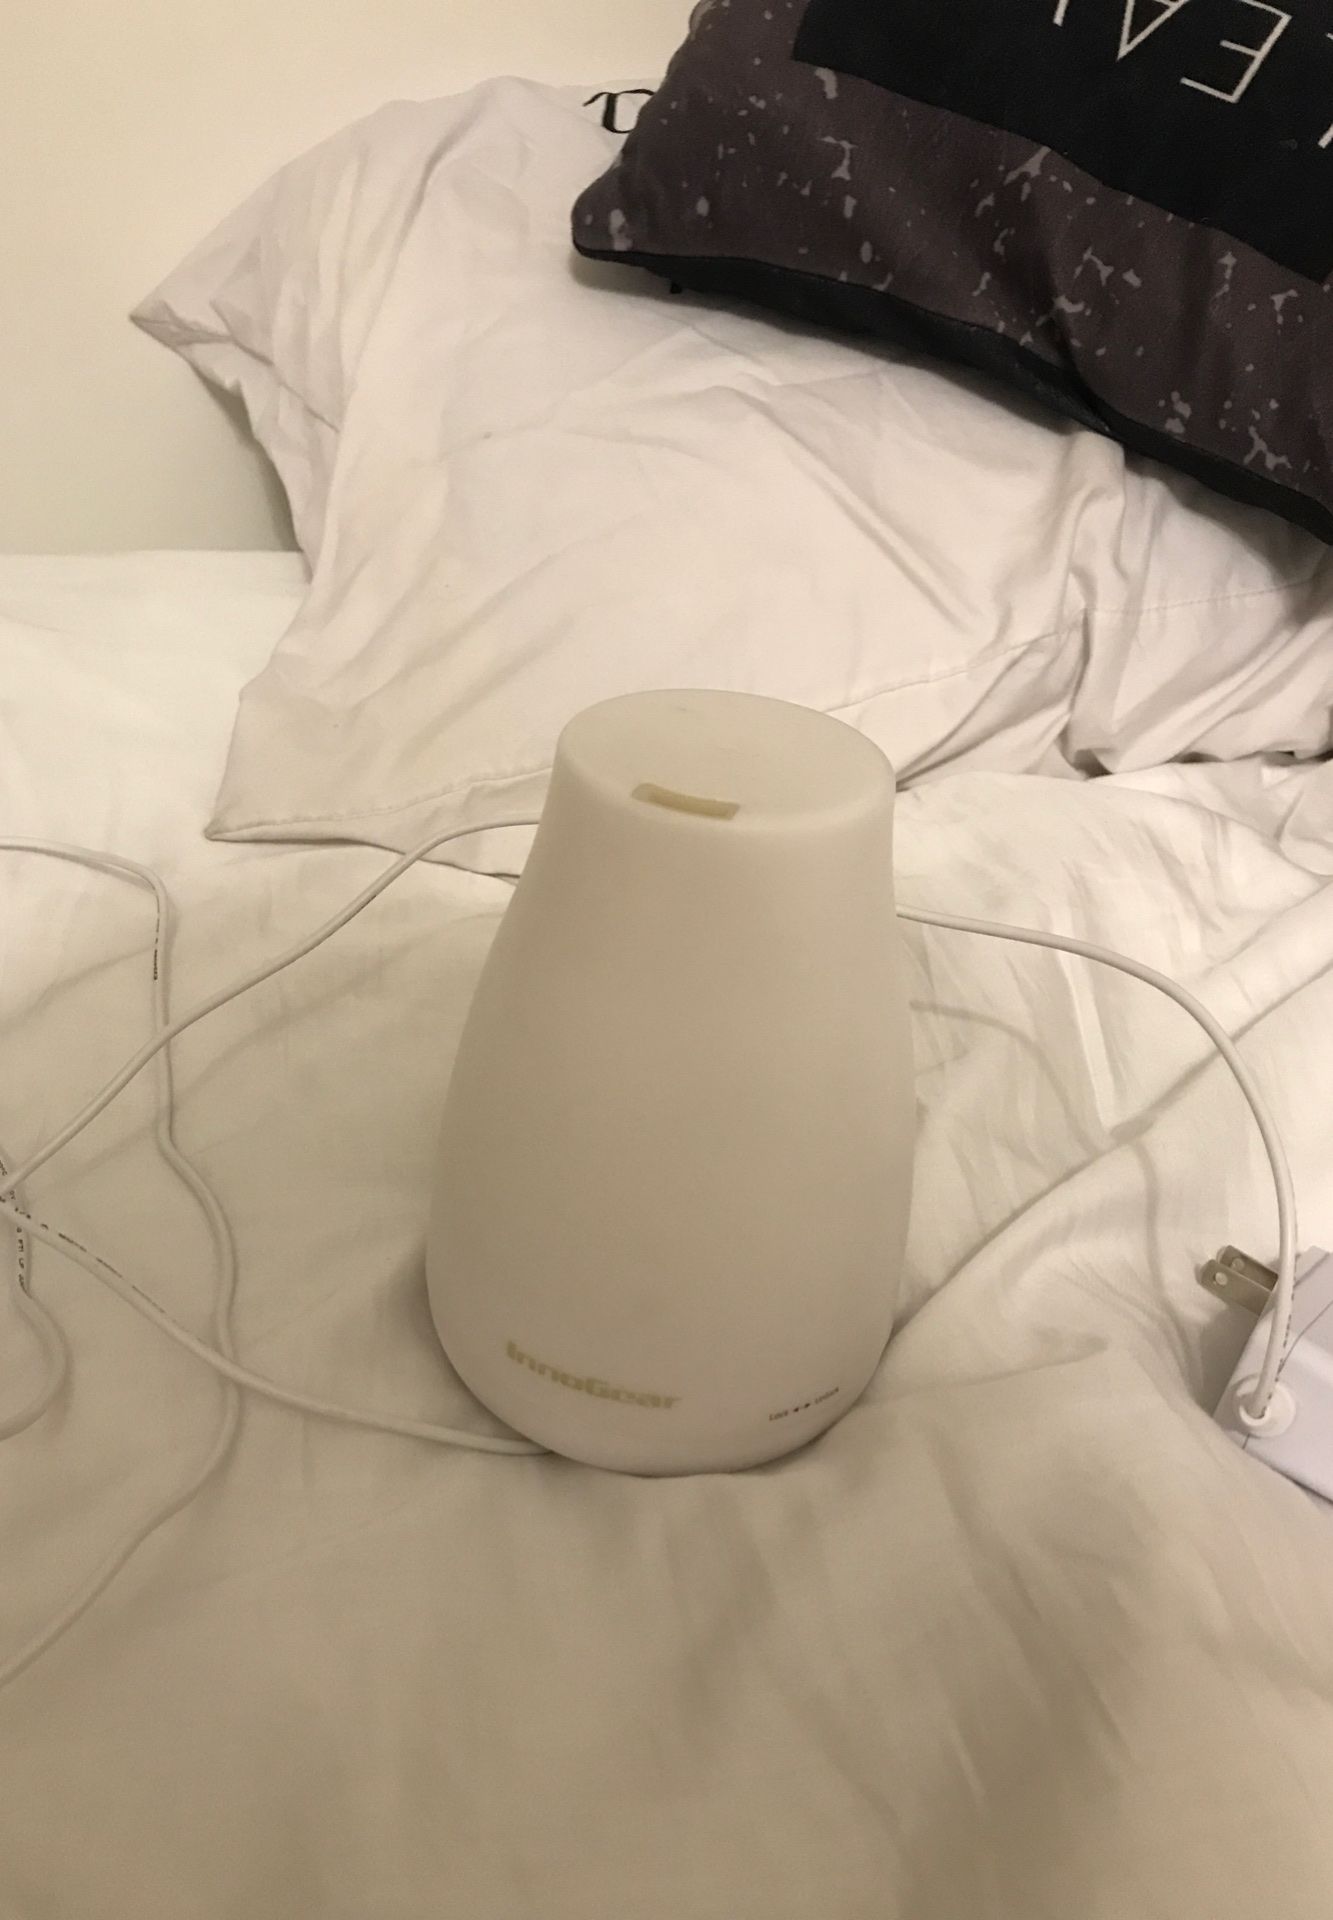 Essential oils humidifier